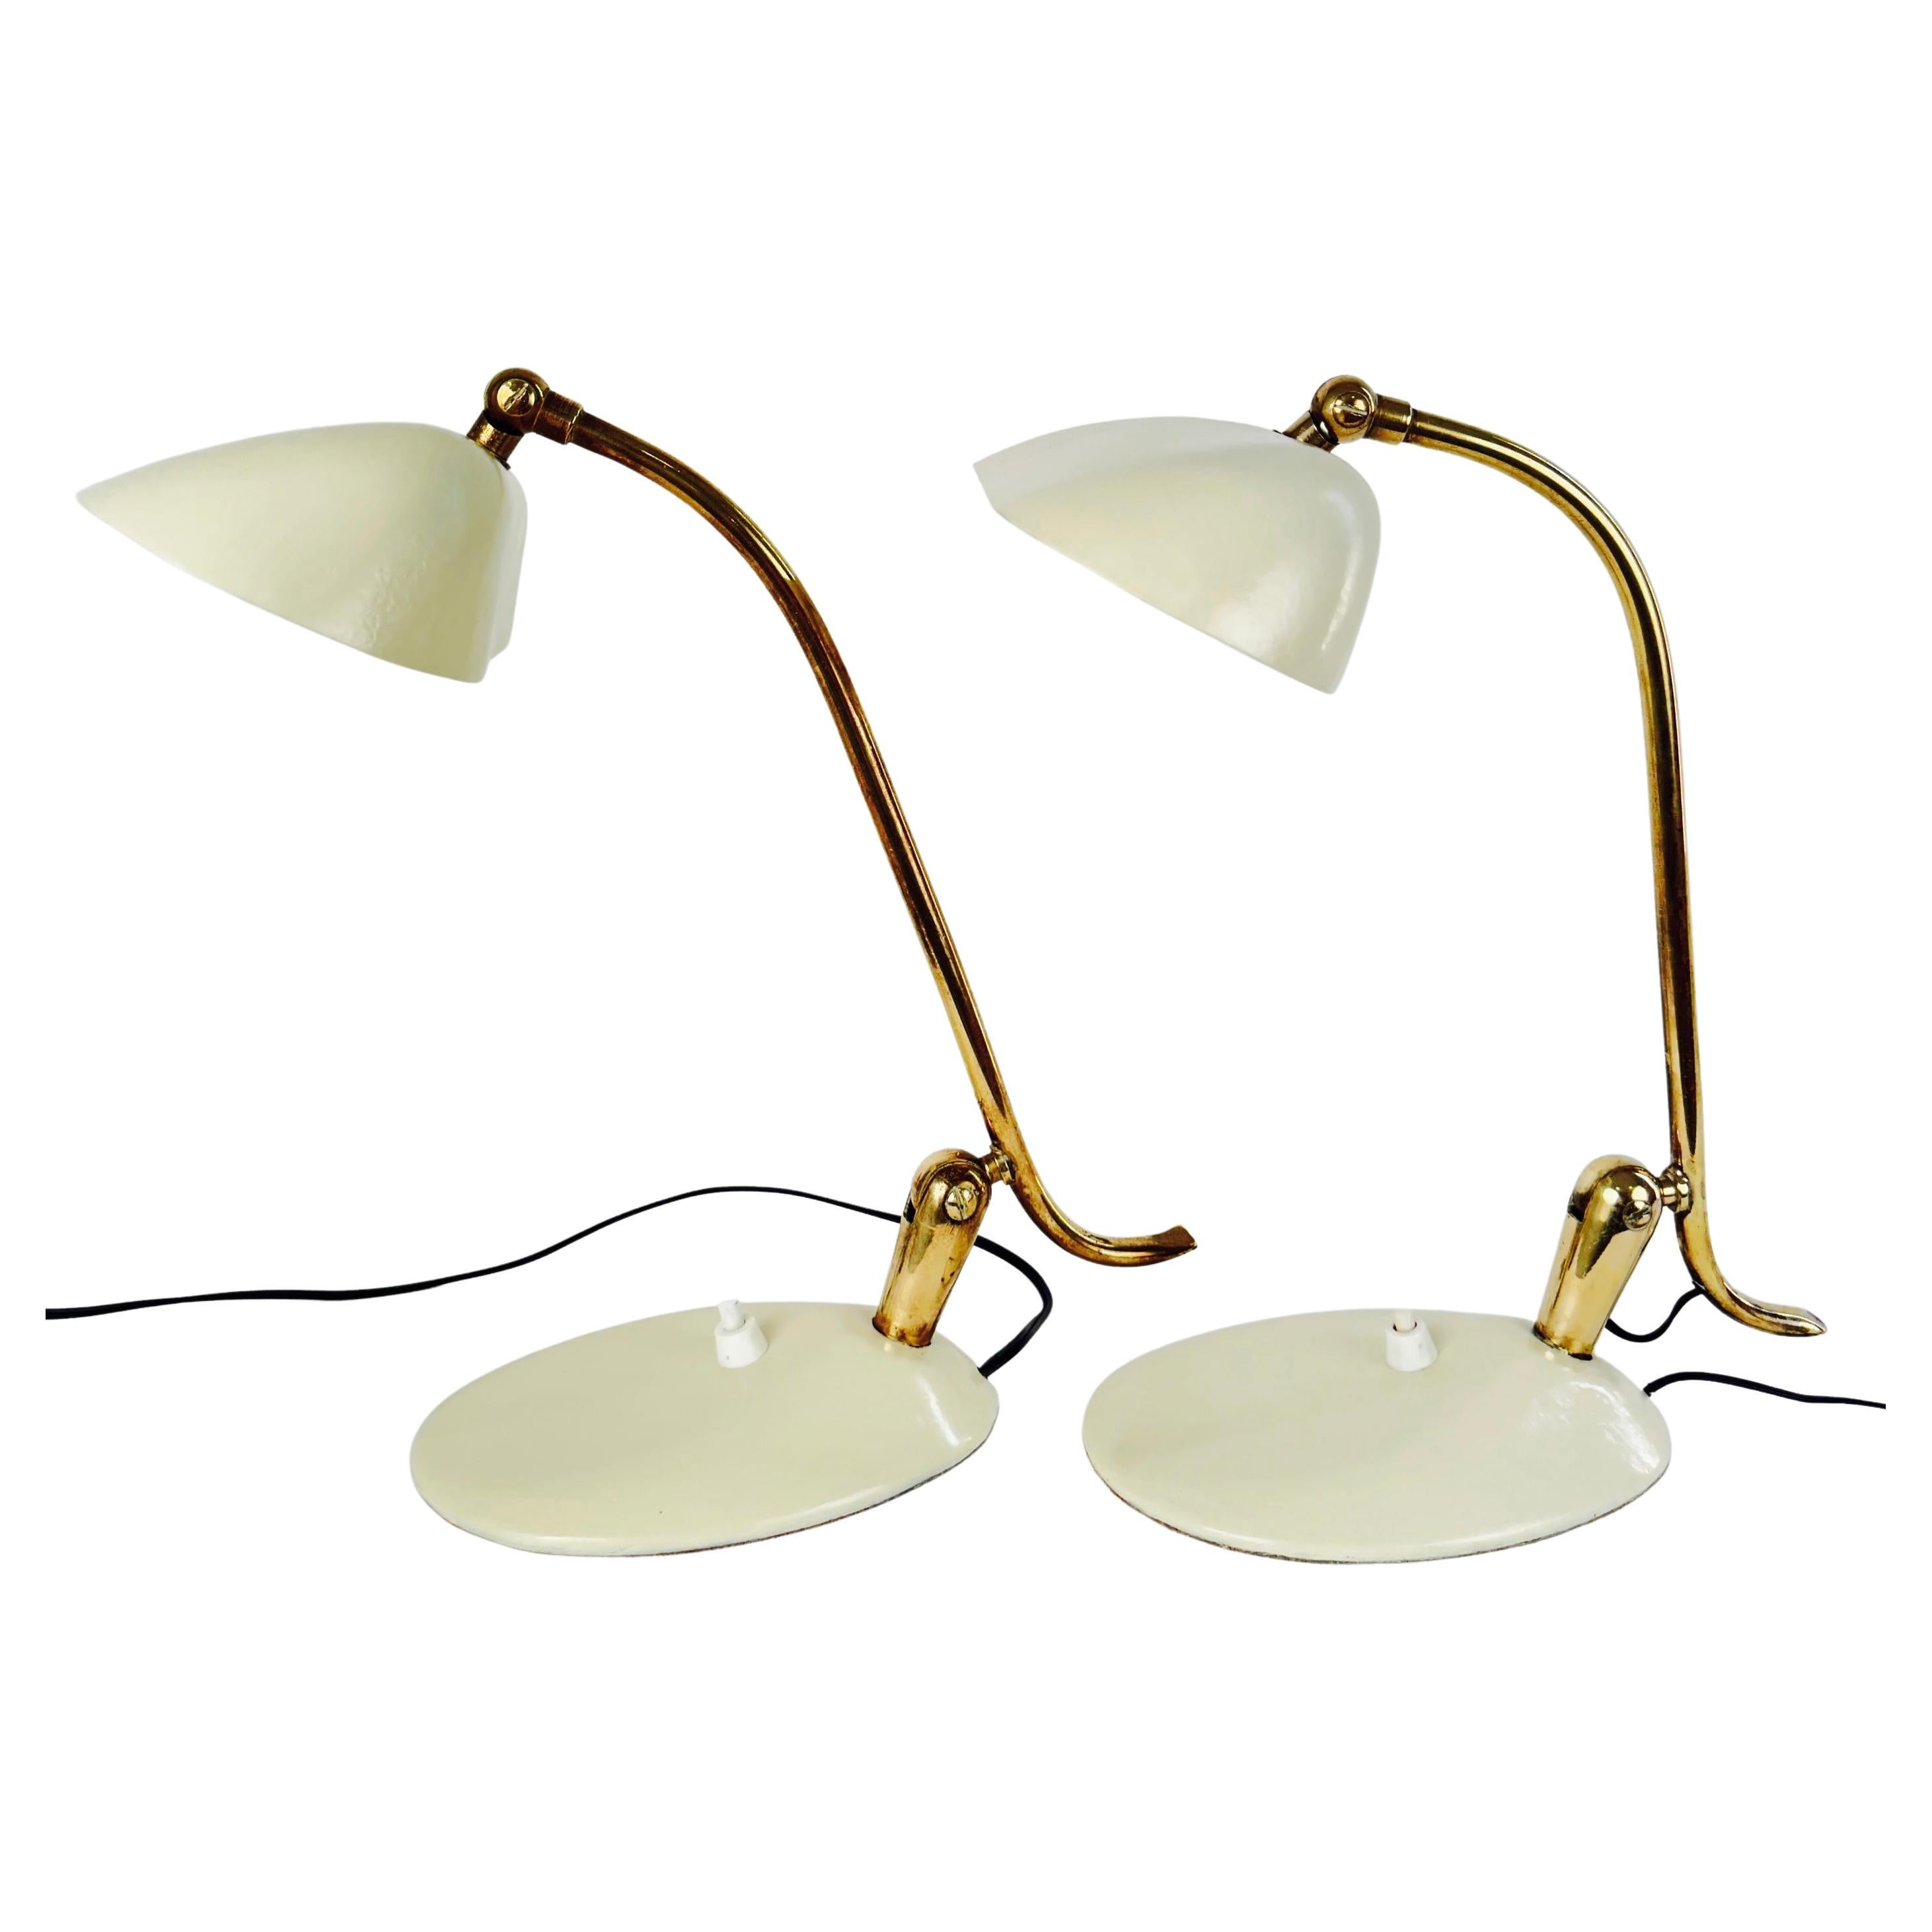 Stilnovo Pair of Table Lamps, Italy, 1950 For Sale